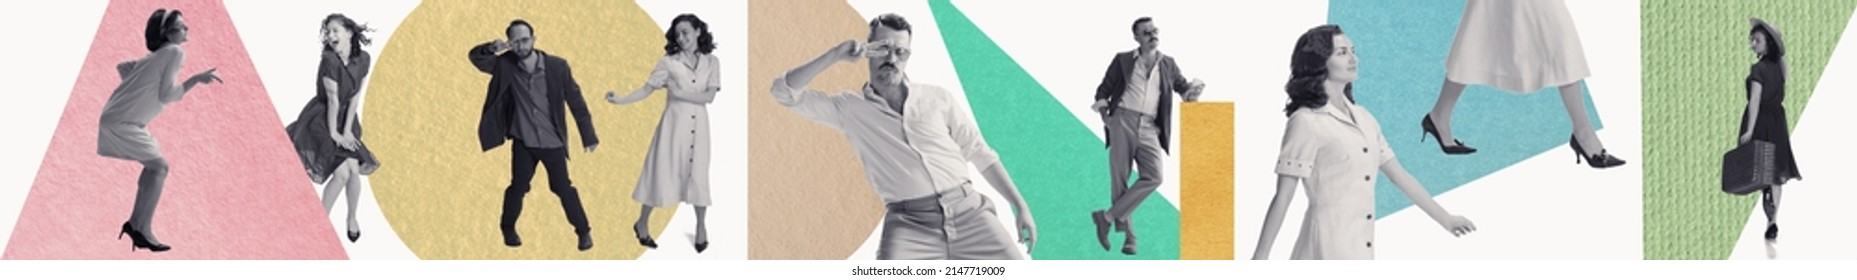 Youth and retro fashion. Contemporary art collage. Dancing men and women in retro 70s, 80s styled clothes over bright background with drawings. Concept of art, music, event, party, creativity. Flyer - Shutterstock ID 2147719009